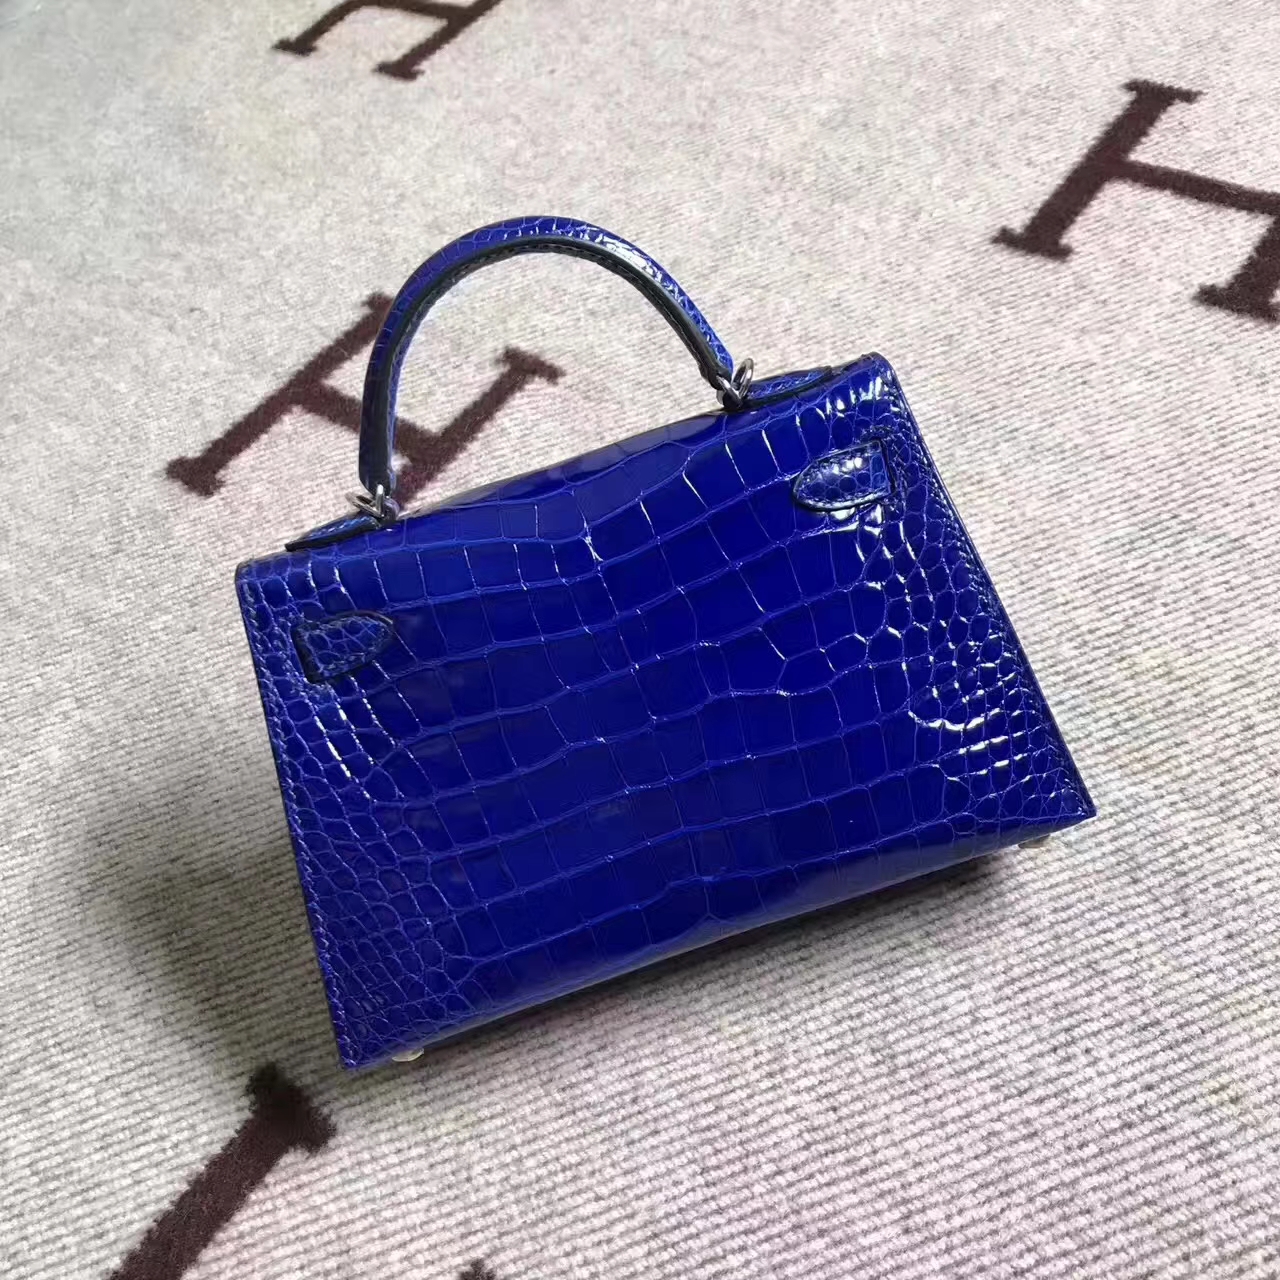 Hot Sale Hermes 7T Blue Electric Crocodile Shiny Leather Minikelly-2 Clutch Bag